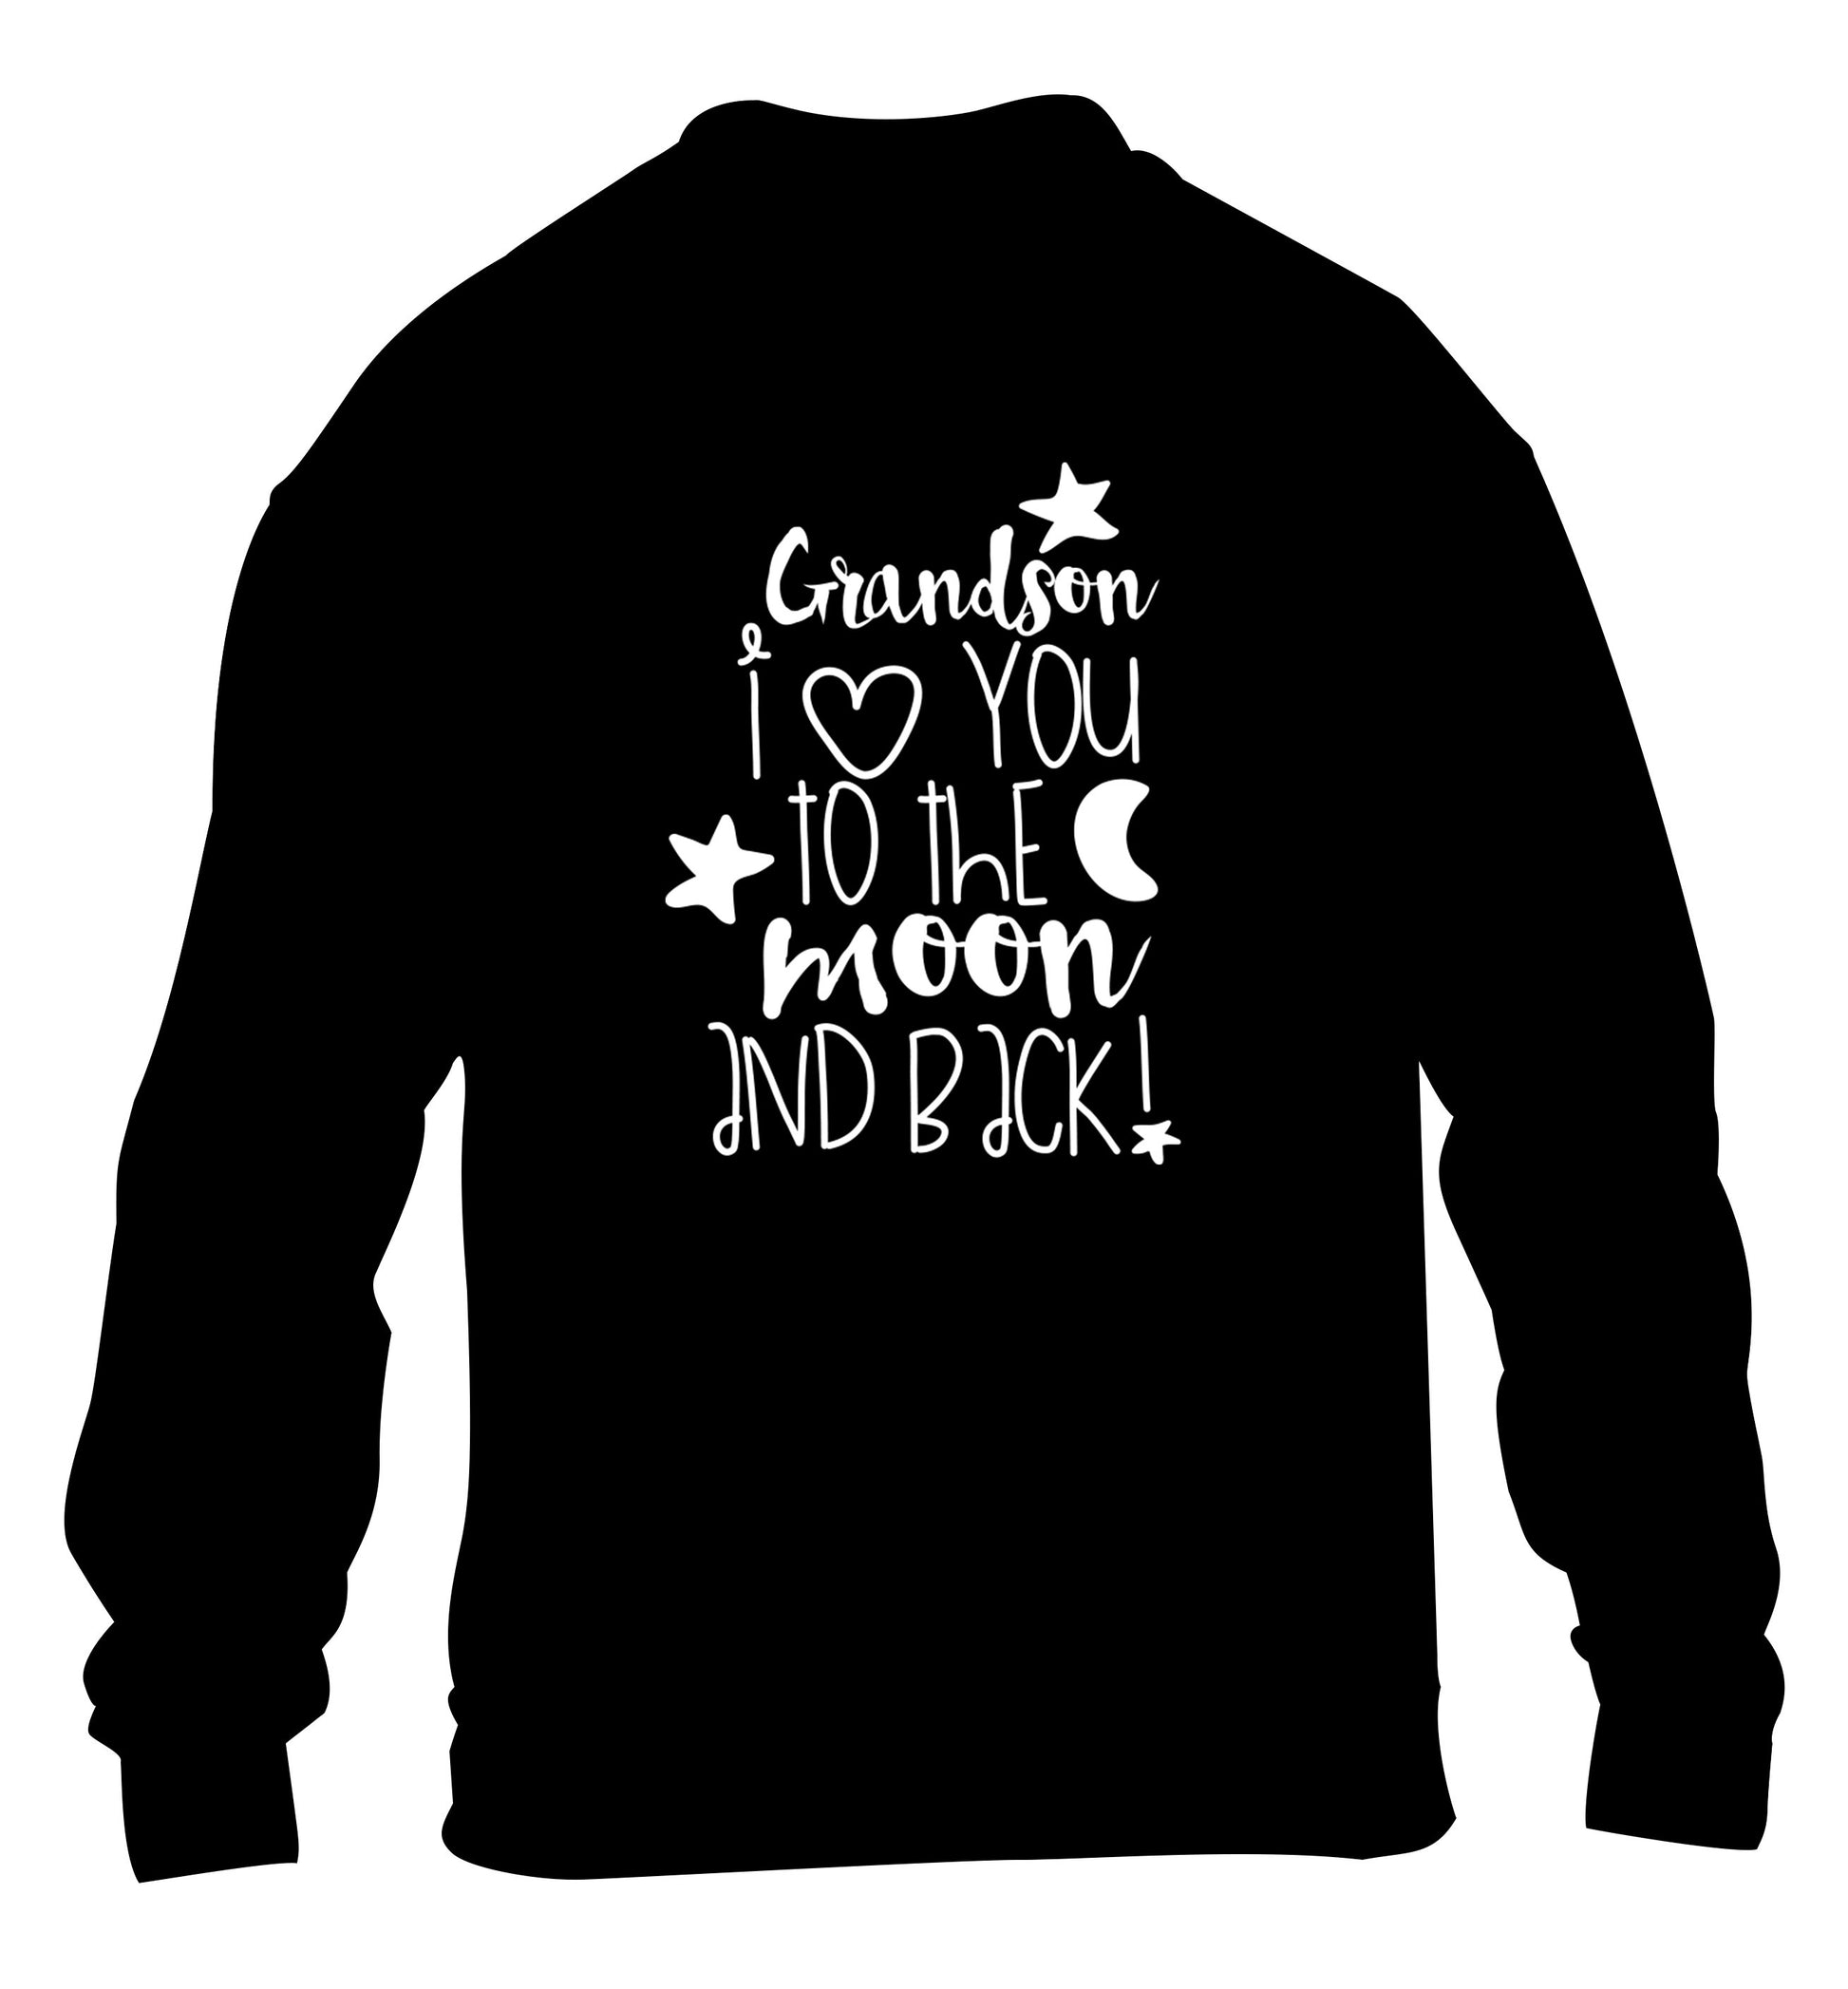 Grandson I love you to the moon and back children's black  sweater 12-14 Years